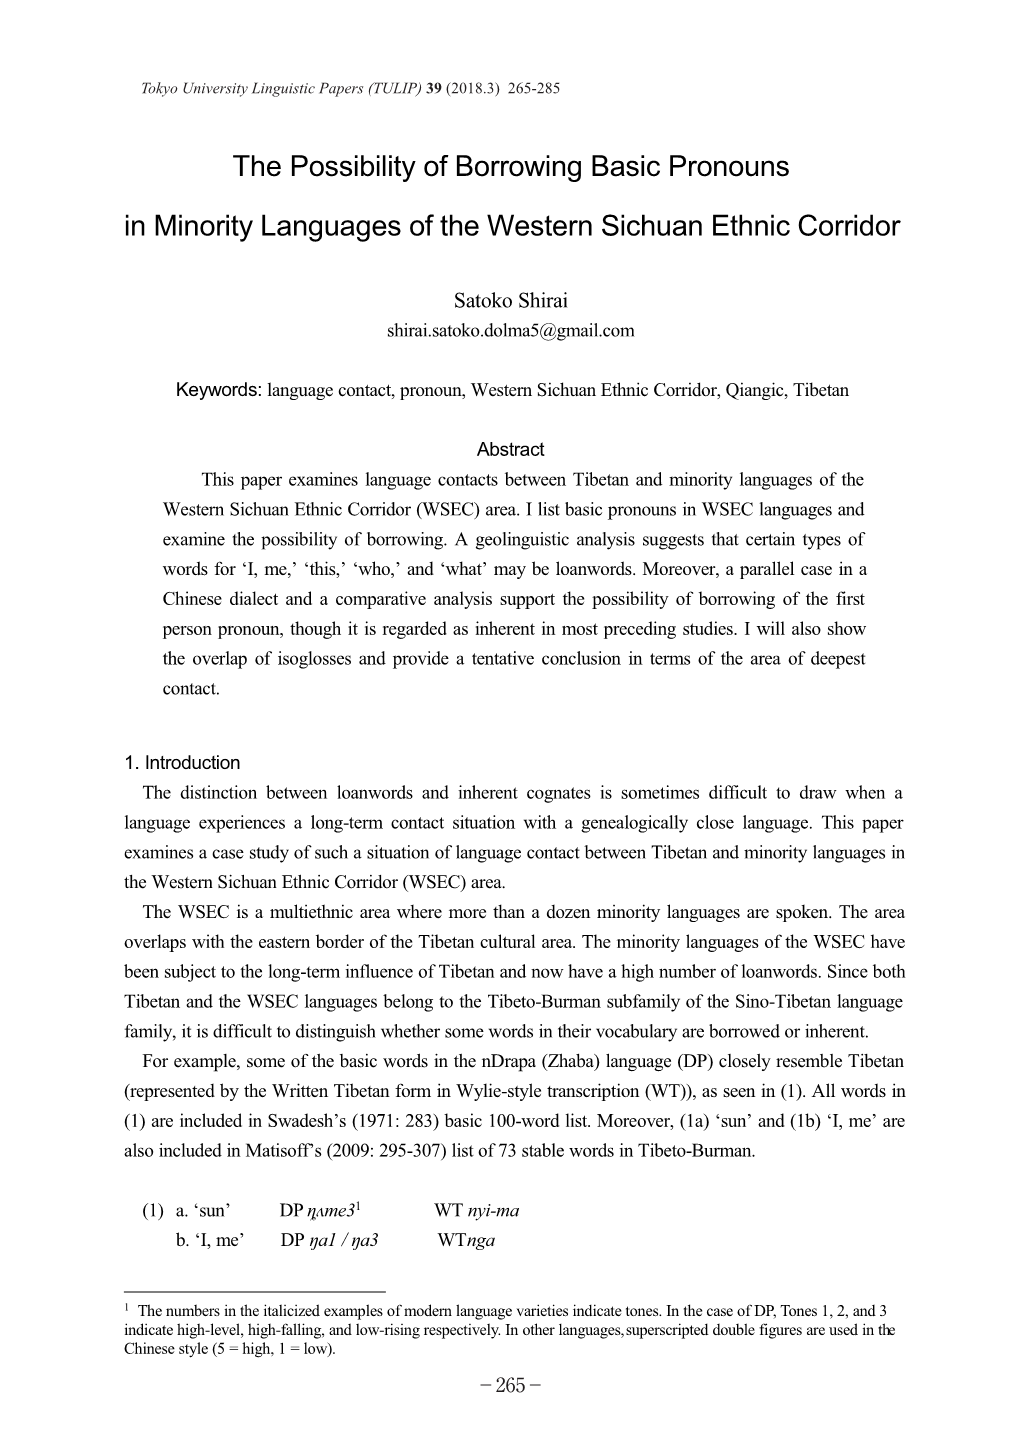 The Possibility of Borrowing Basic Pronouns in Minority Languages of the Western Sichuan Ethnic Corridor